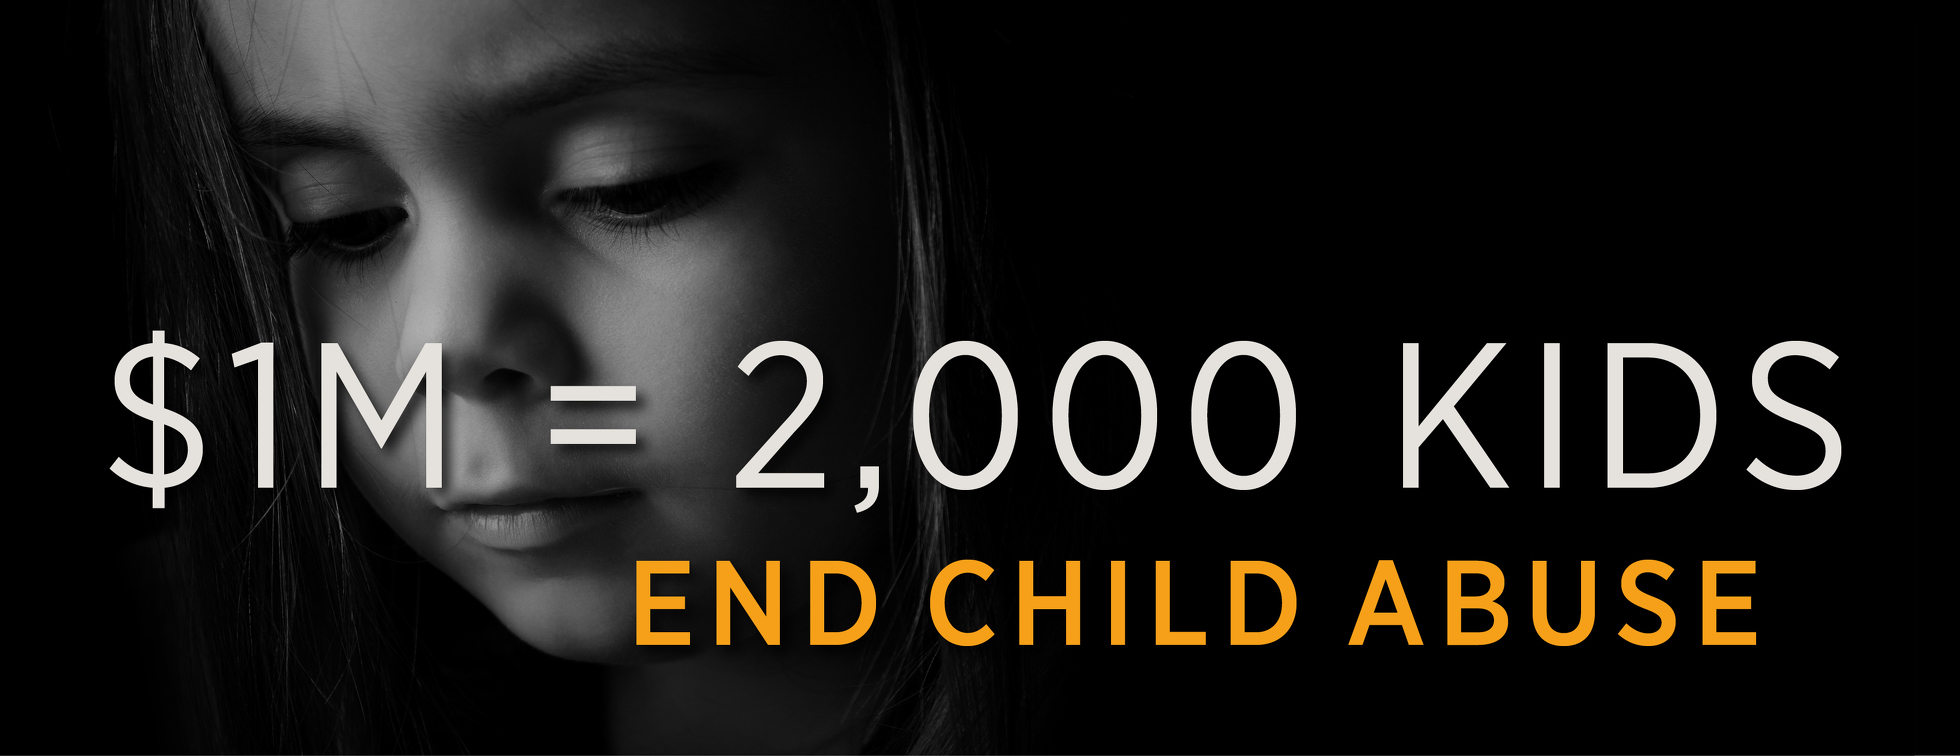 No Excuse. Stop Child Abuse. Give Today!